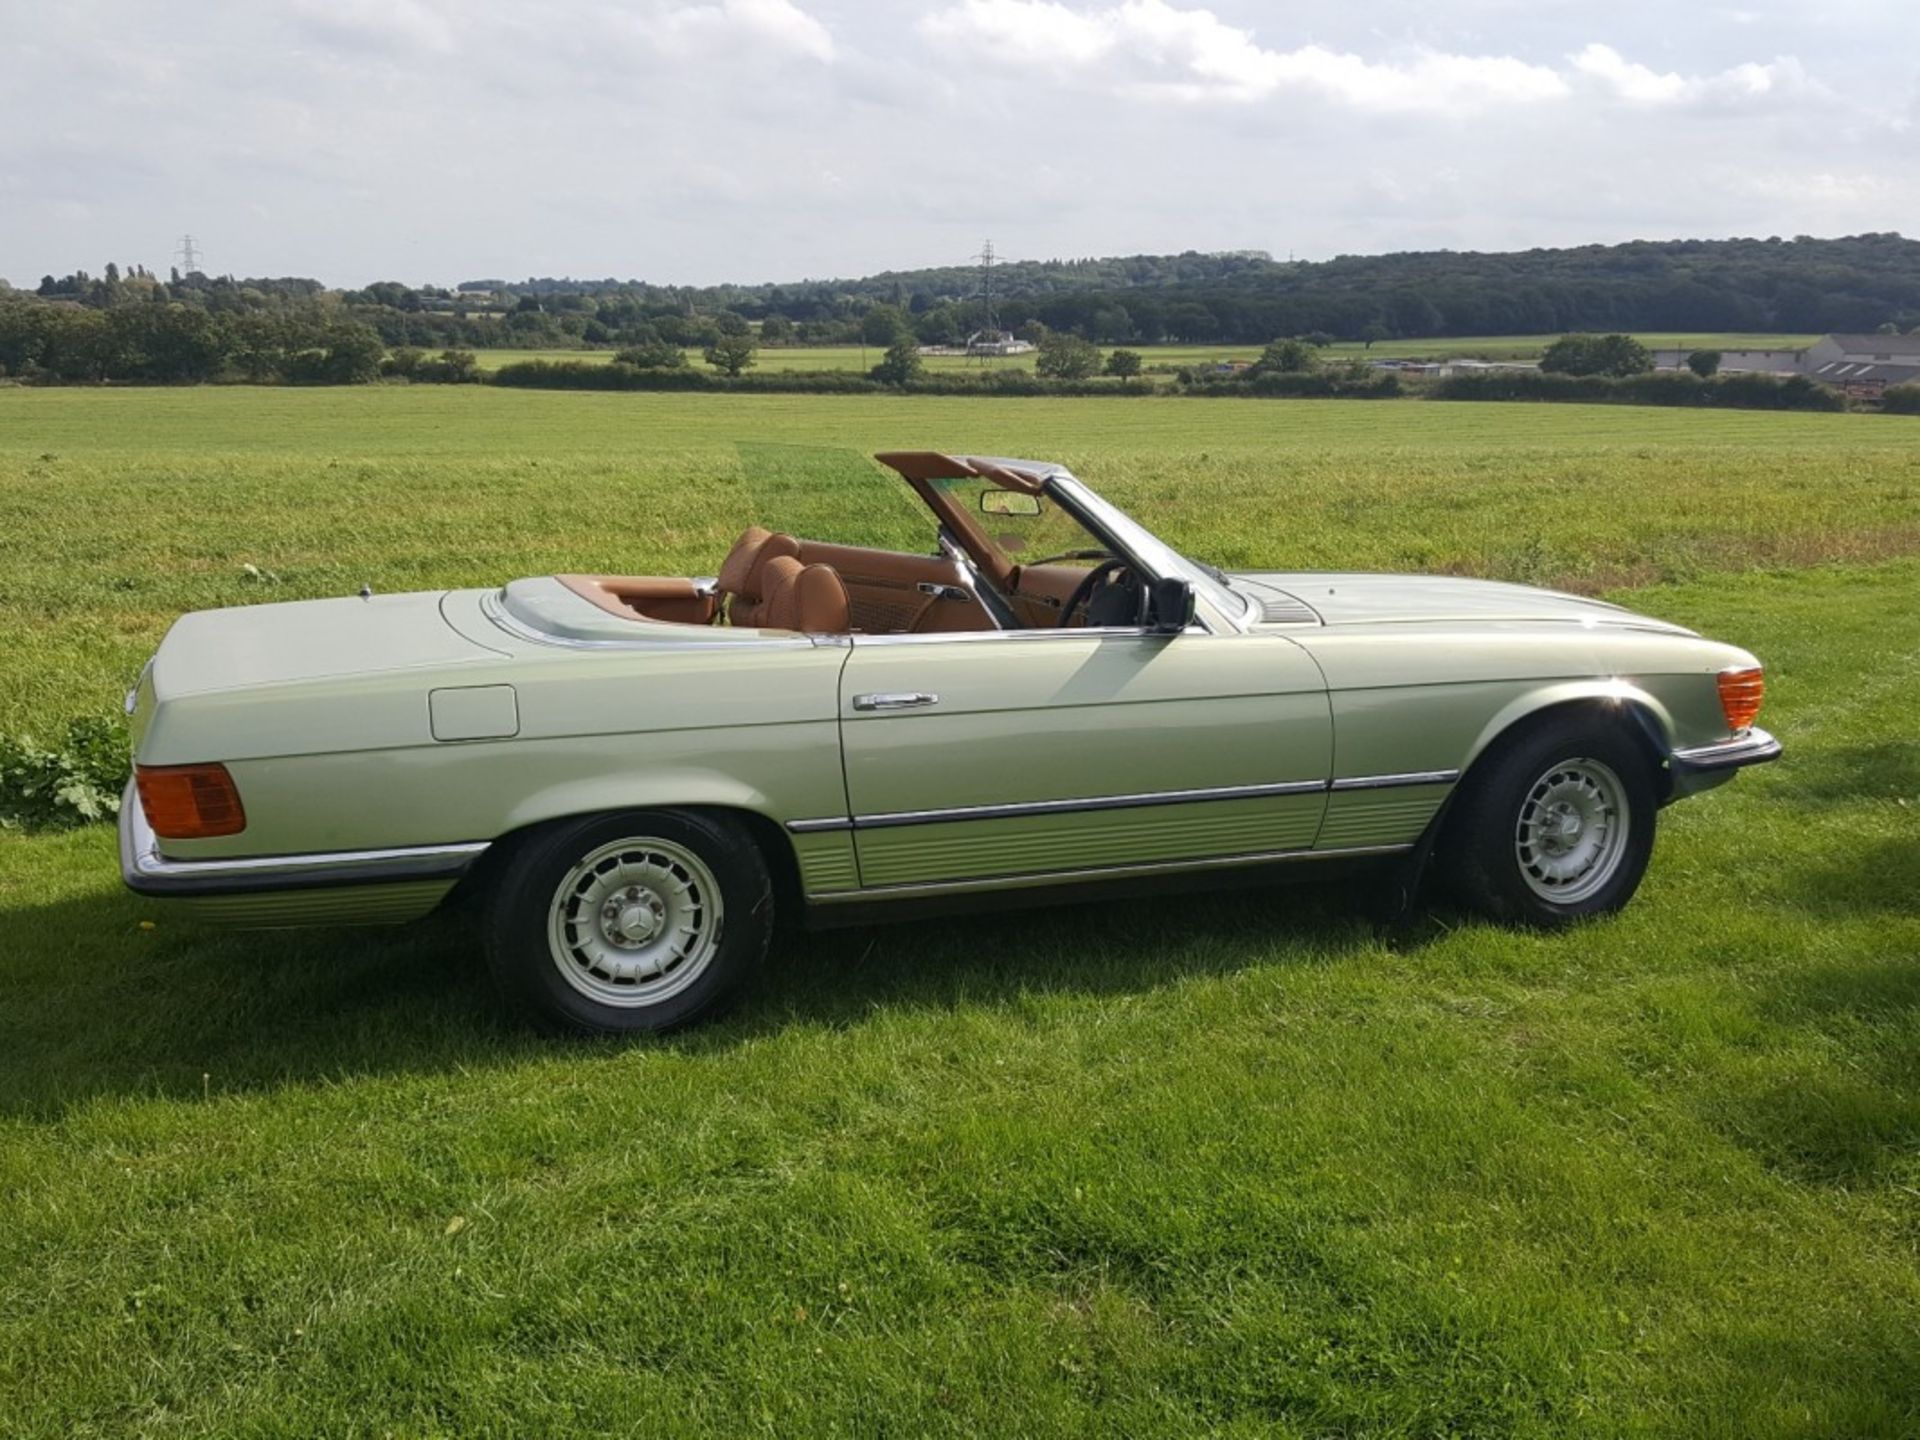 Mercedes 450SL Automatic 1978 - Image 3 of 12